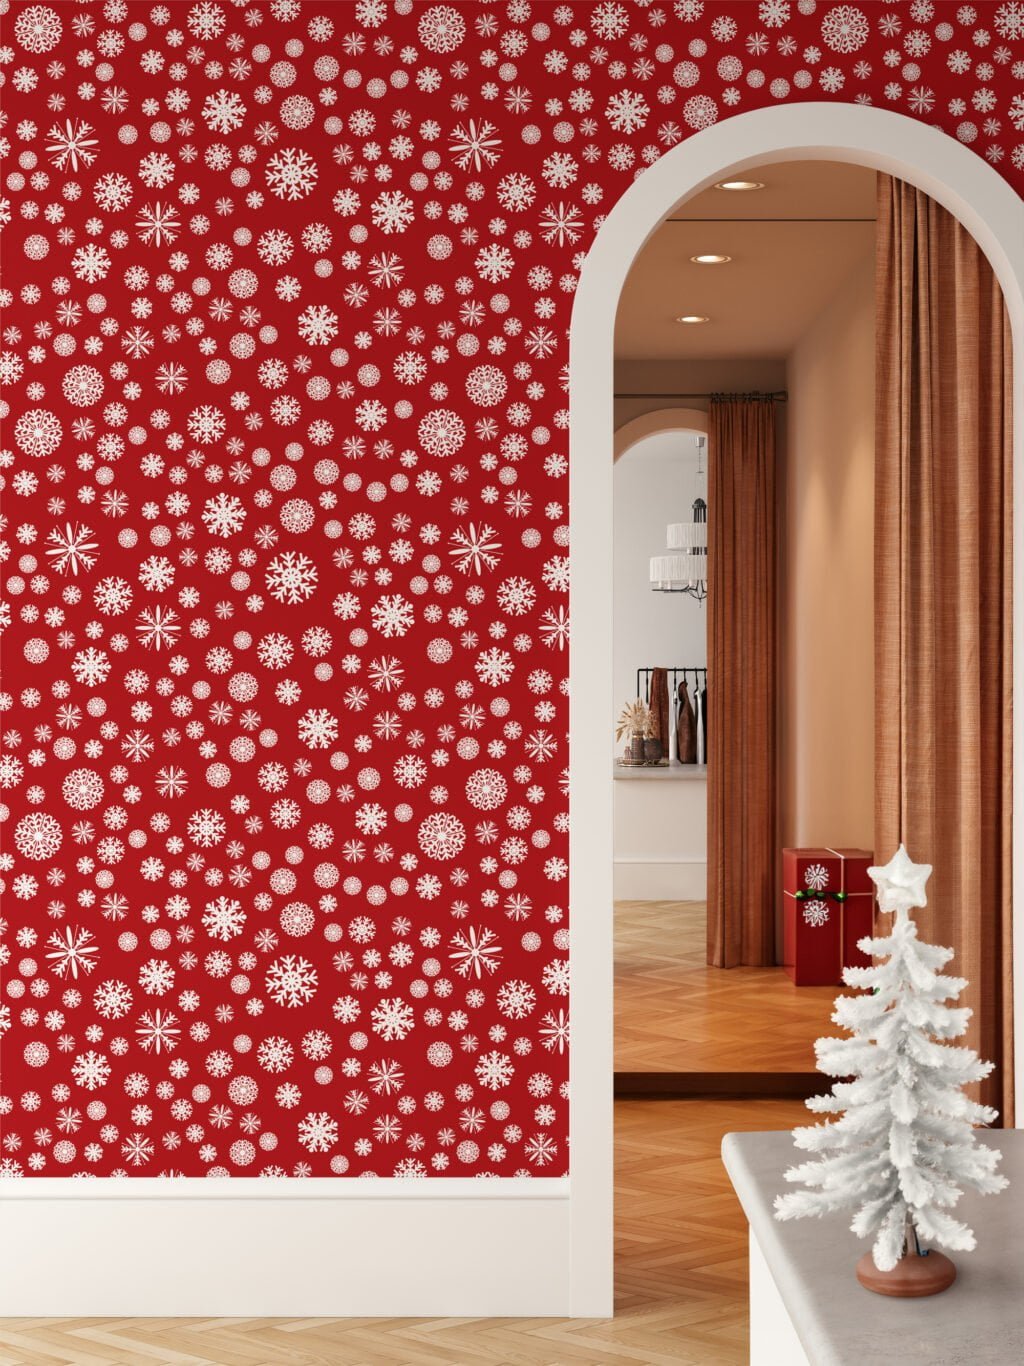 White Snowflakes On A Red Background Illustration Wallpaper, Cheerful Holiday-Inspired Peel & Stick Wall Mural